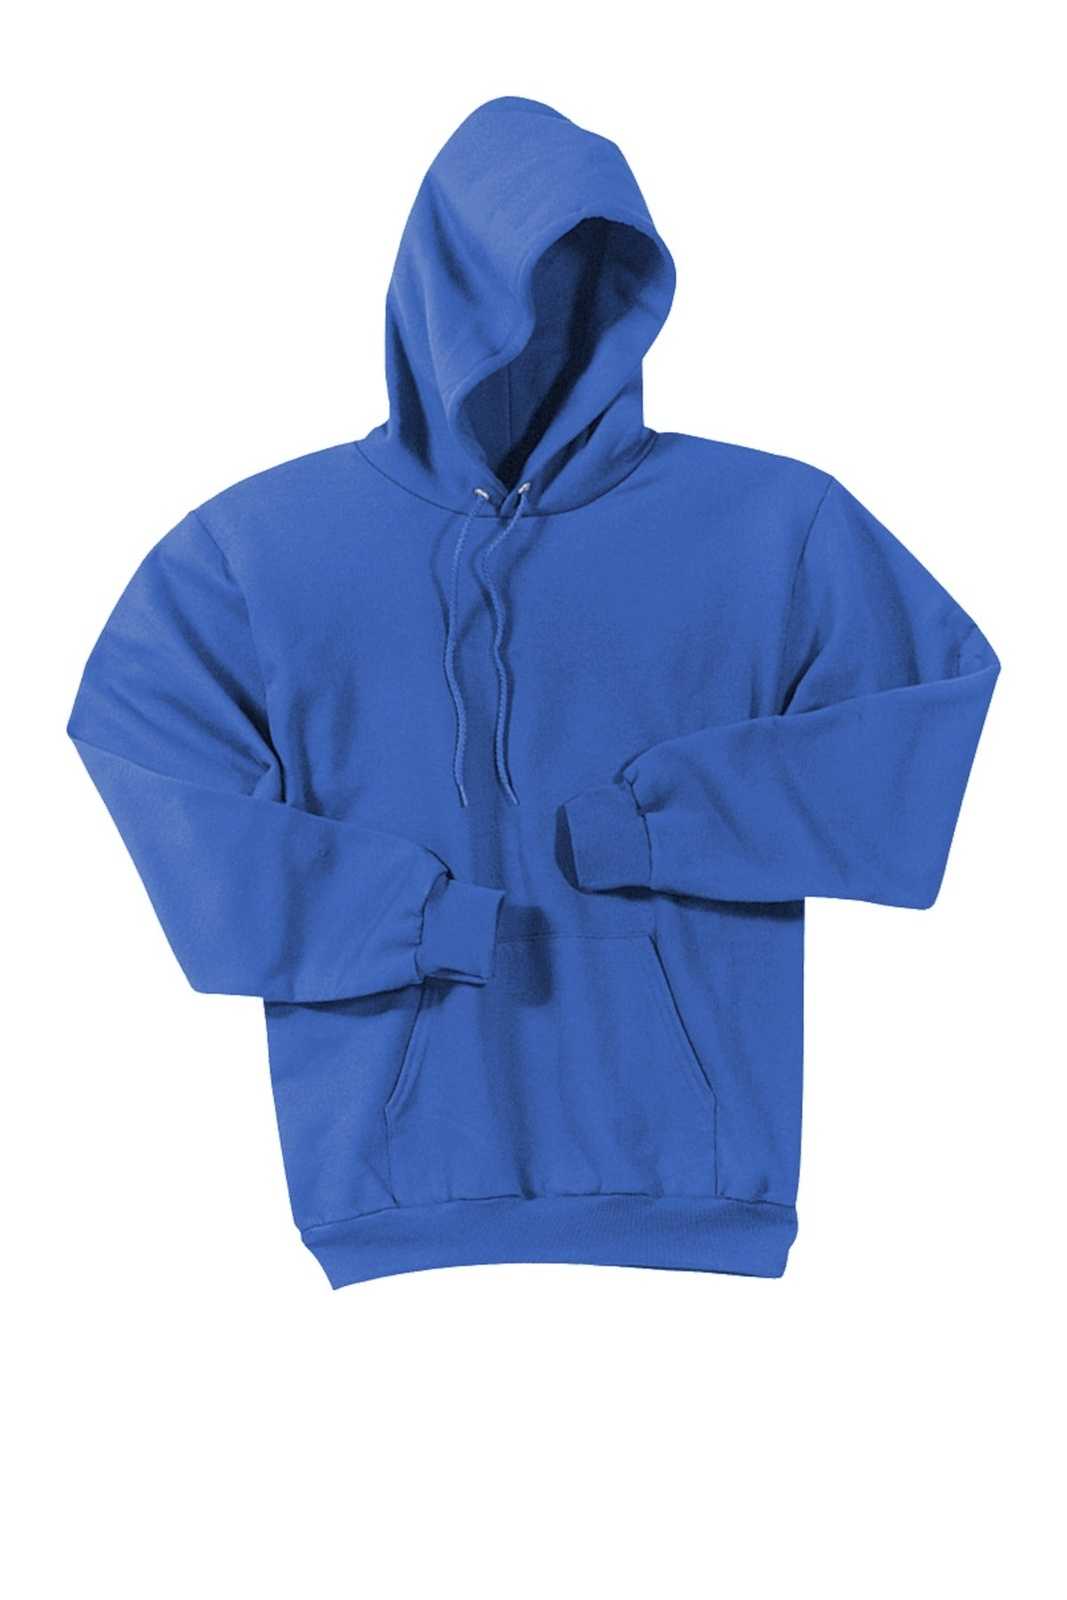 Port & Company PC90HT Tall Essential Fleece Pullover Hooded Sweatshirt - Royal - HIT a Double - 1